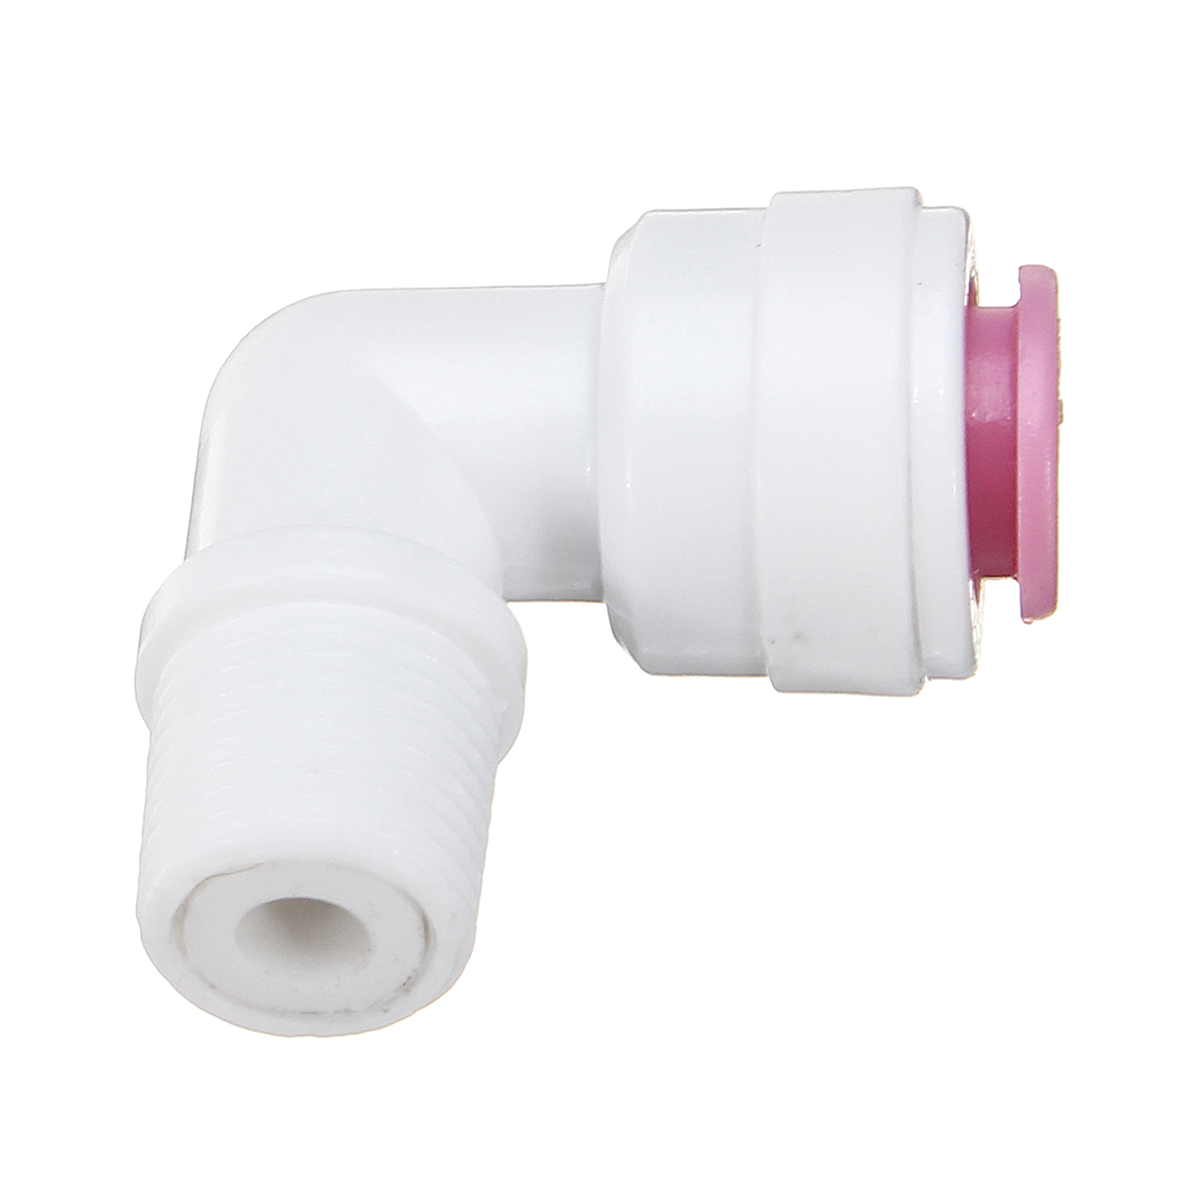 14-18-Inch-RO-Grade-Water-Pipes-Fittings-Quick-Connect-Push-In-to-Connect-Water-Pipe-1378099-4